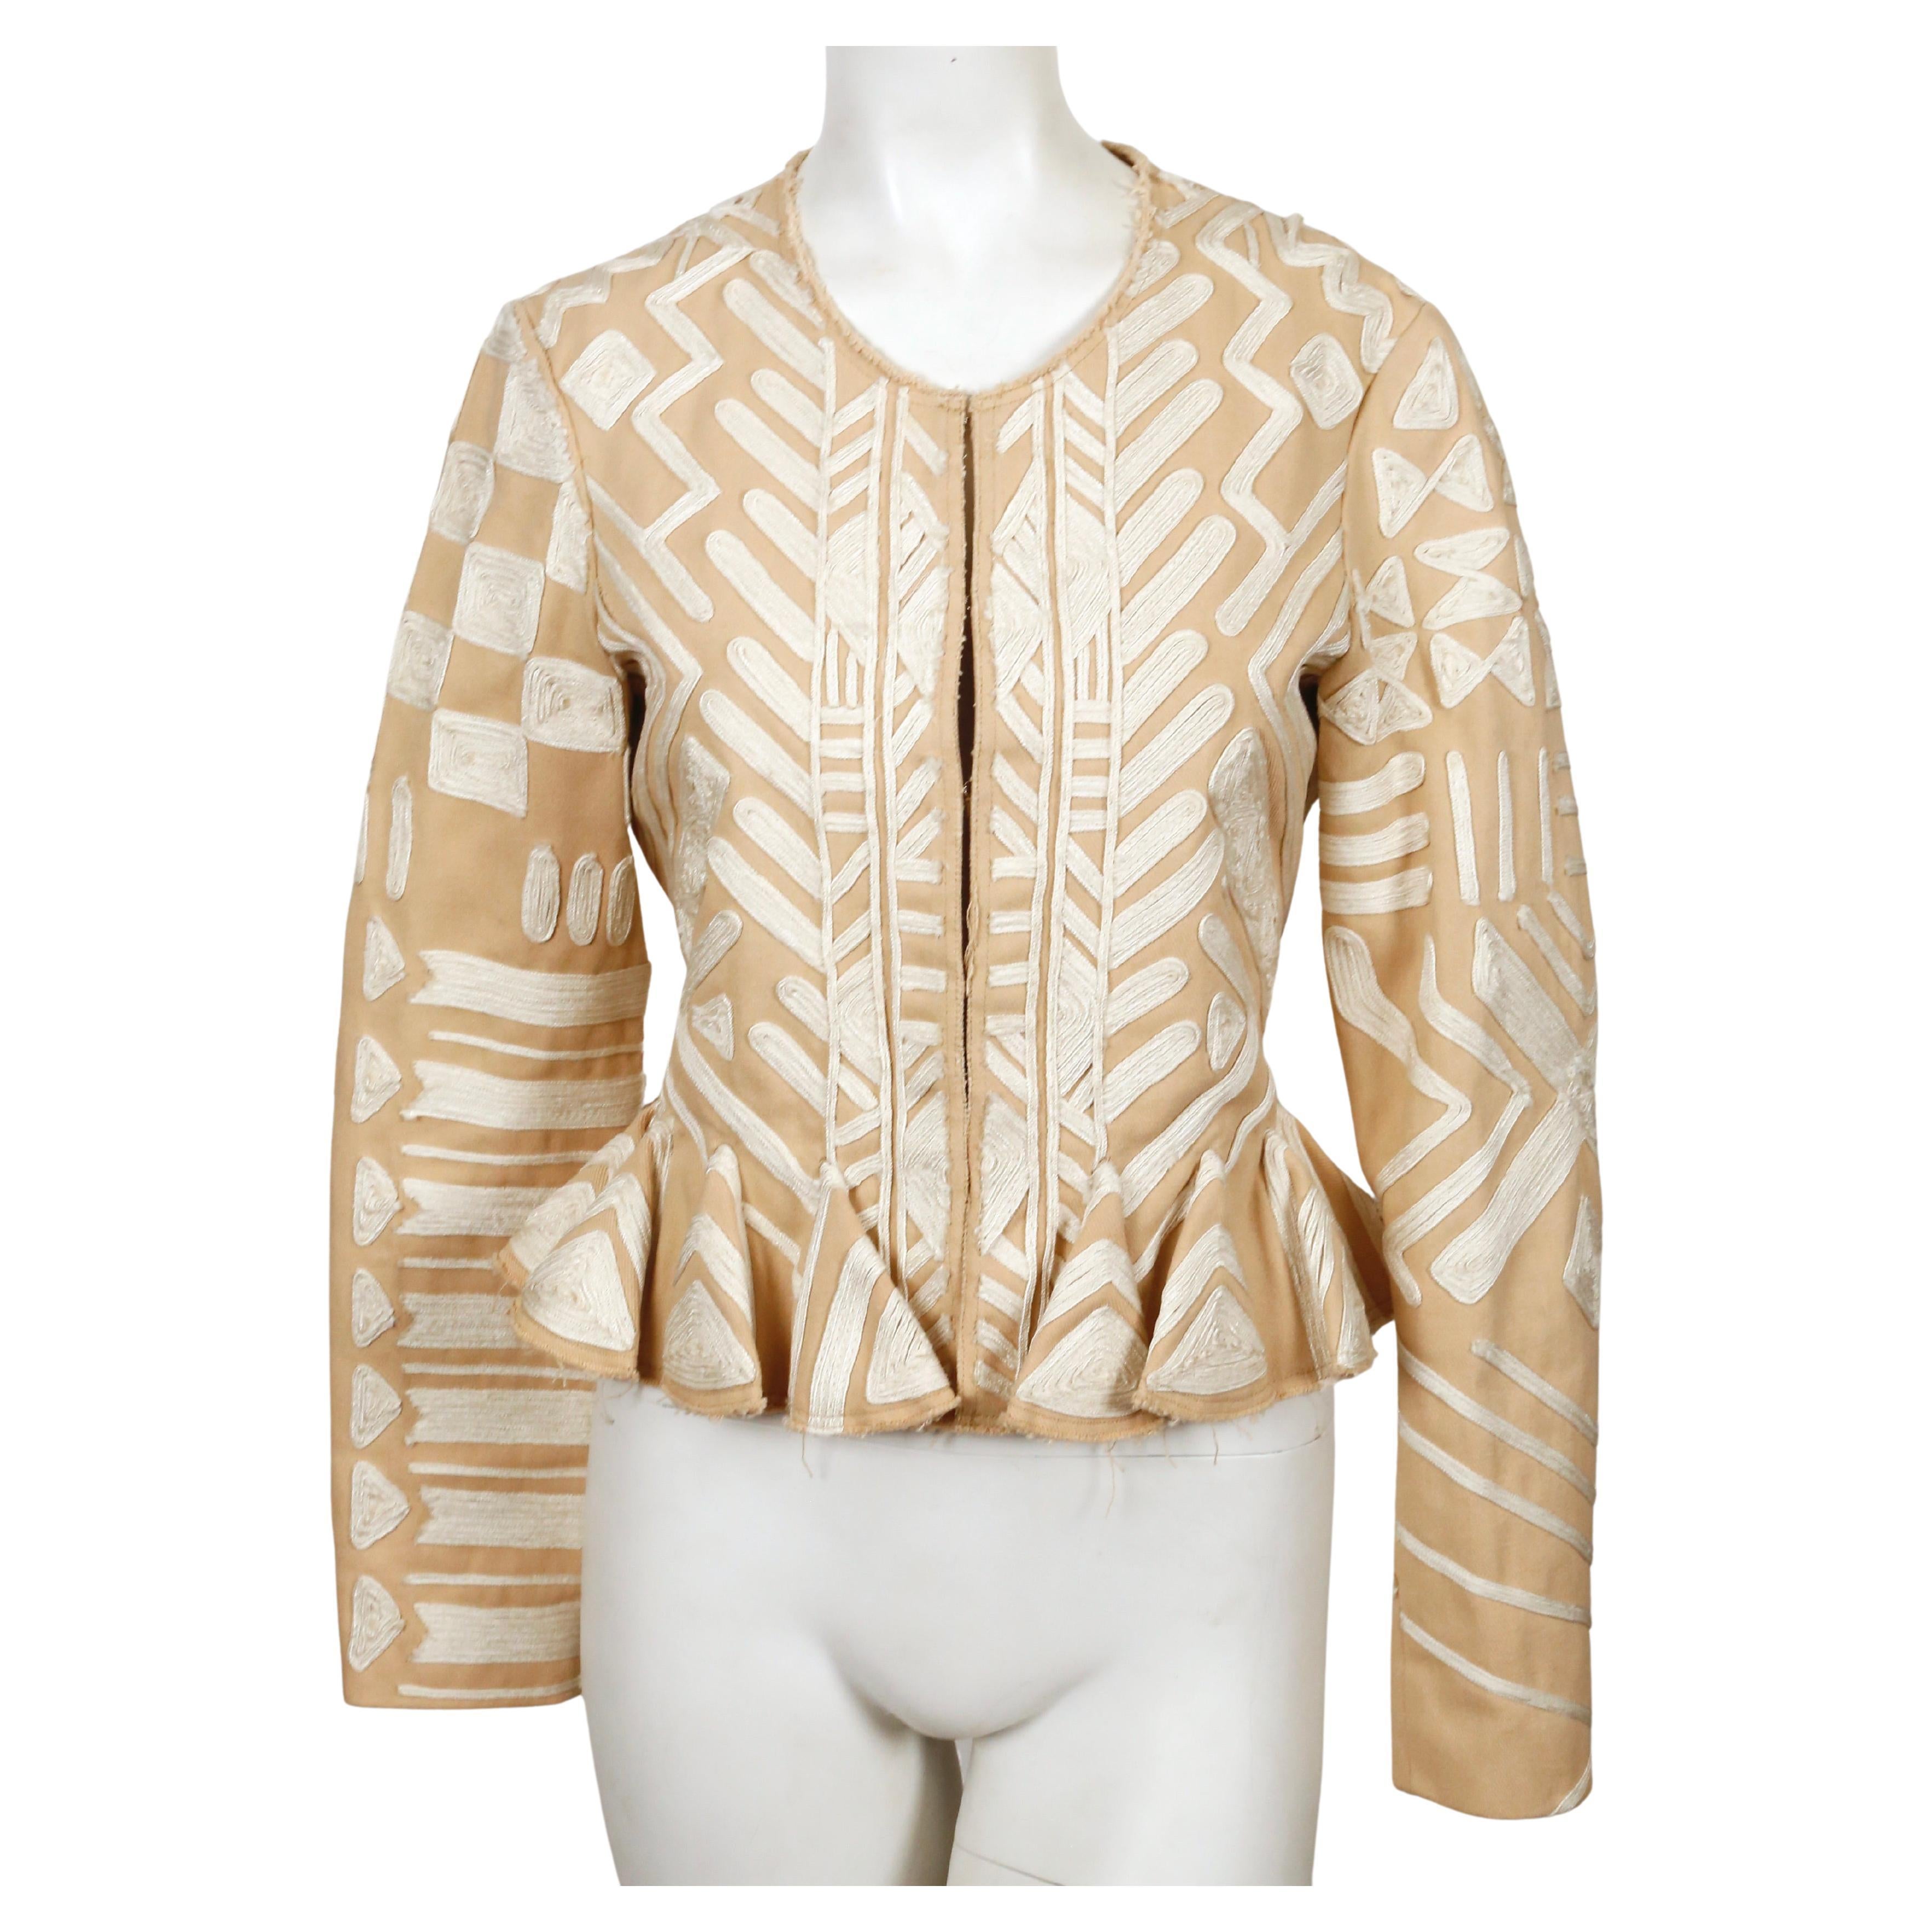 2002 TOM FORD For YVES SAINT LAURENT tan embroidered runway jacket For Sale 1